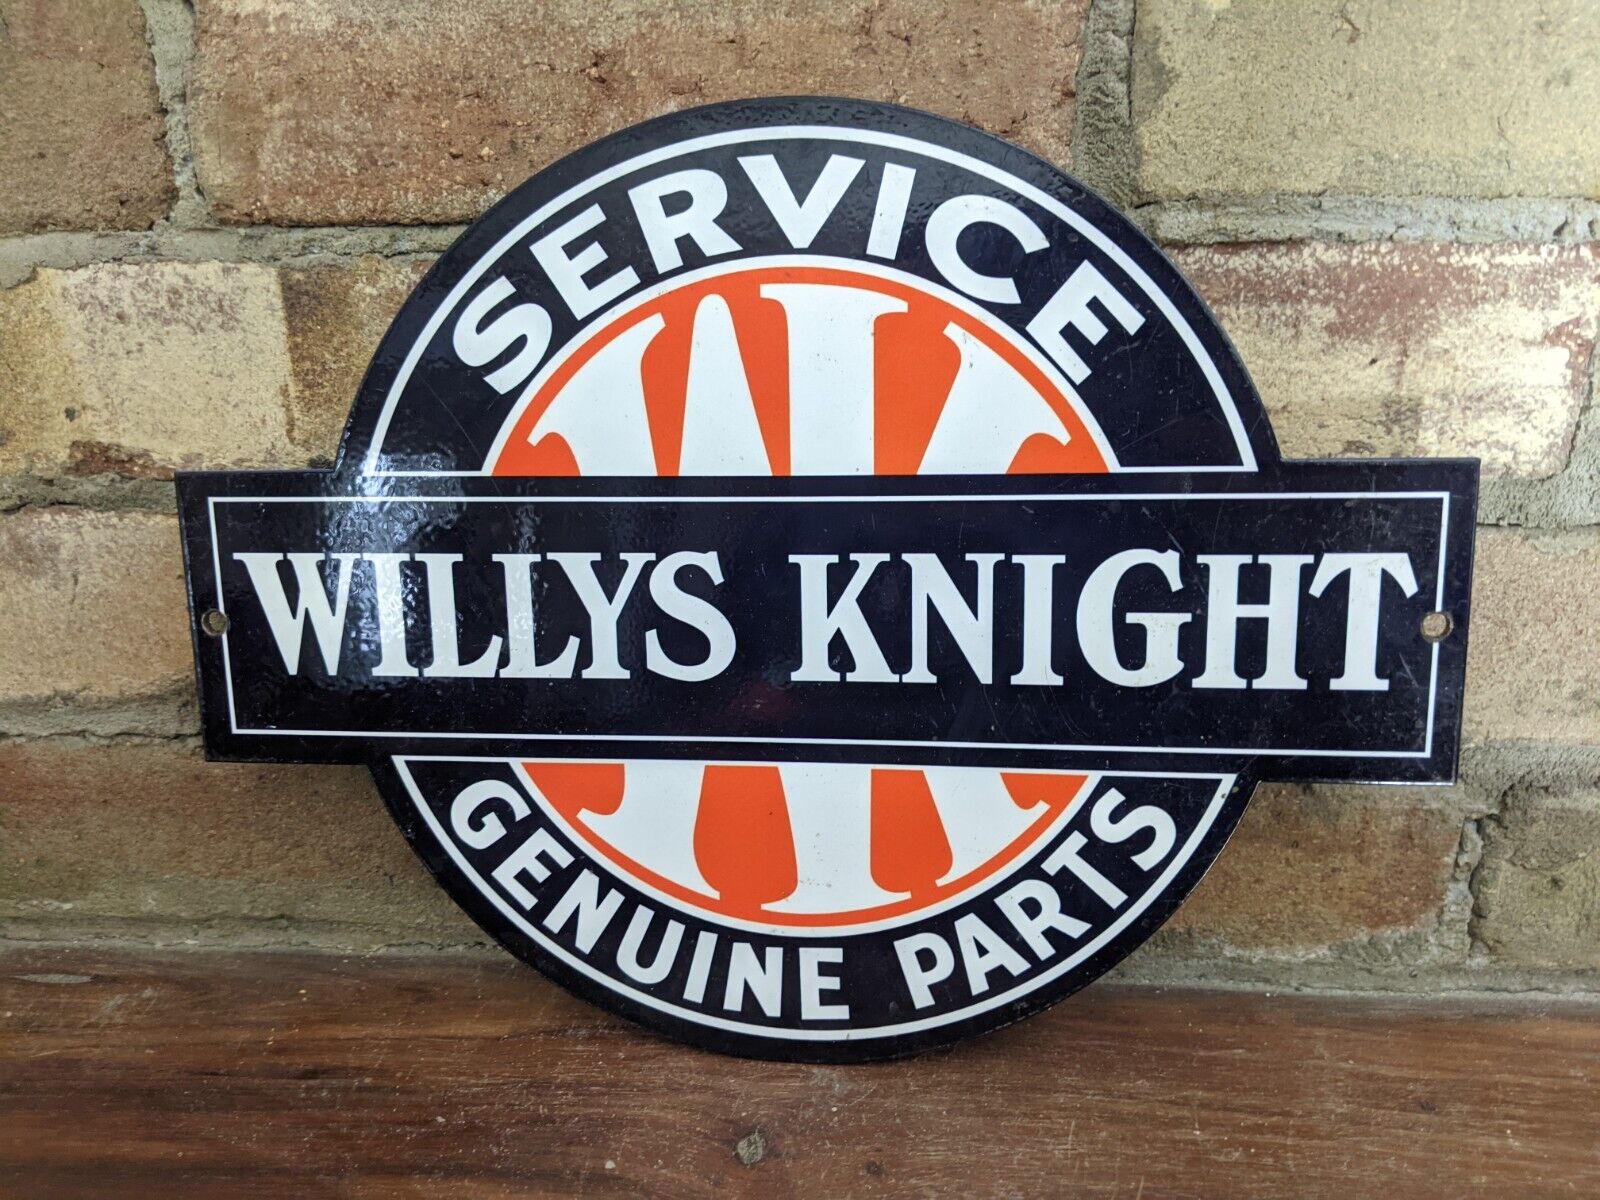 VINTAGE WILLYS KNIGHT PARTS & SERVICE PORCELAIN ADVERTISING SIGN 12